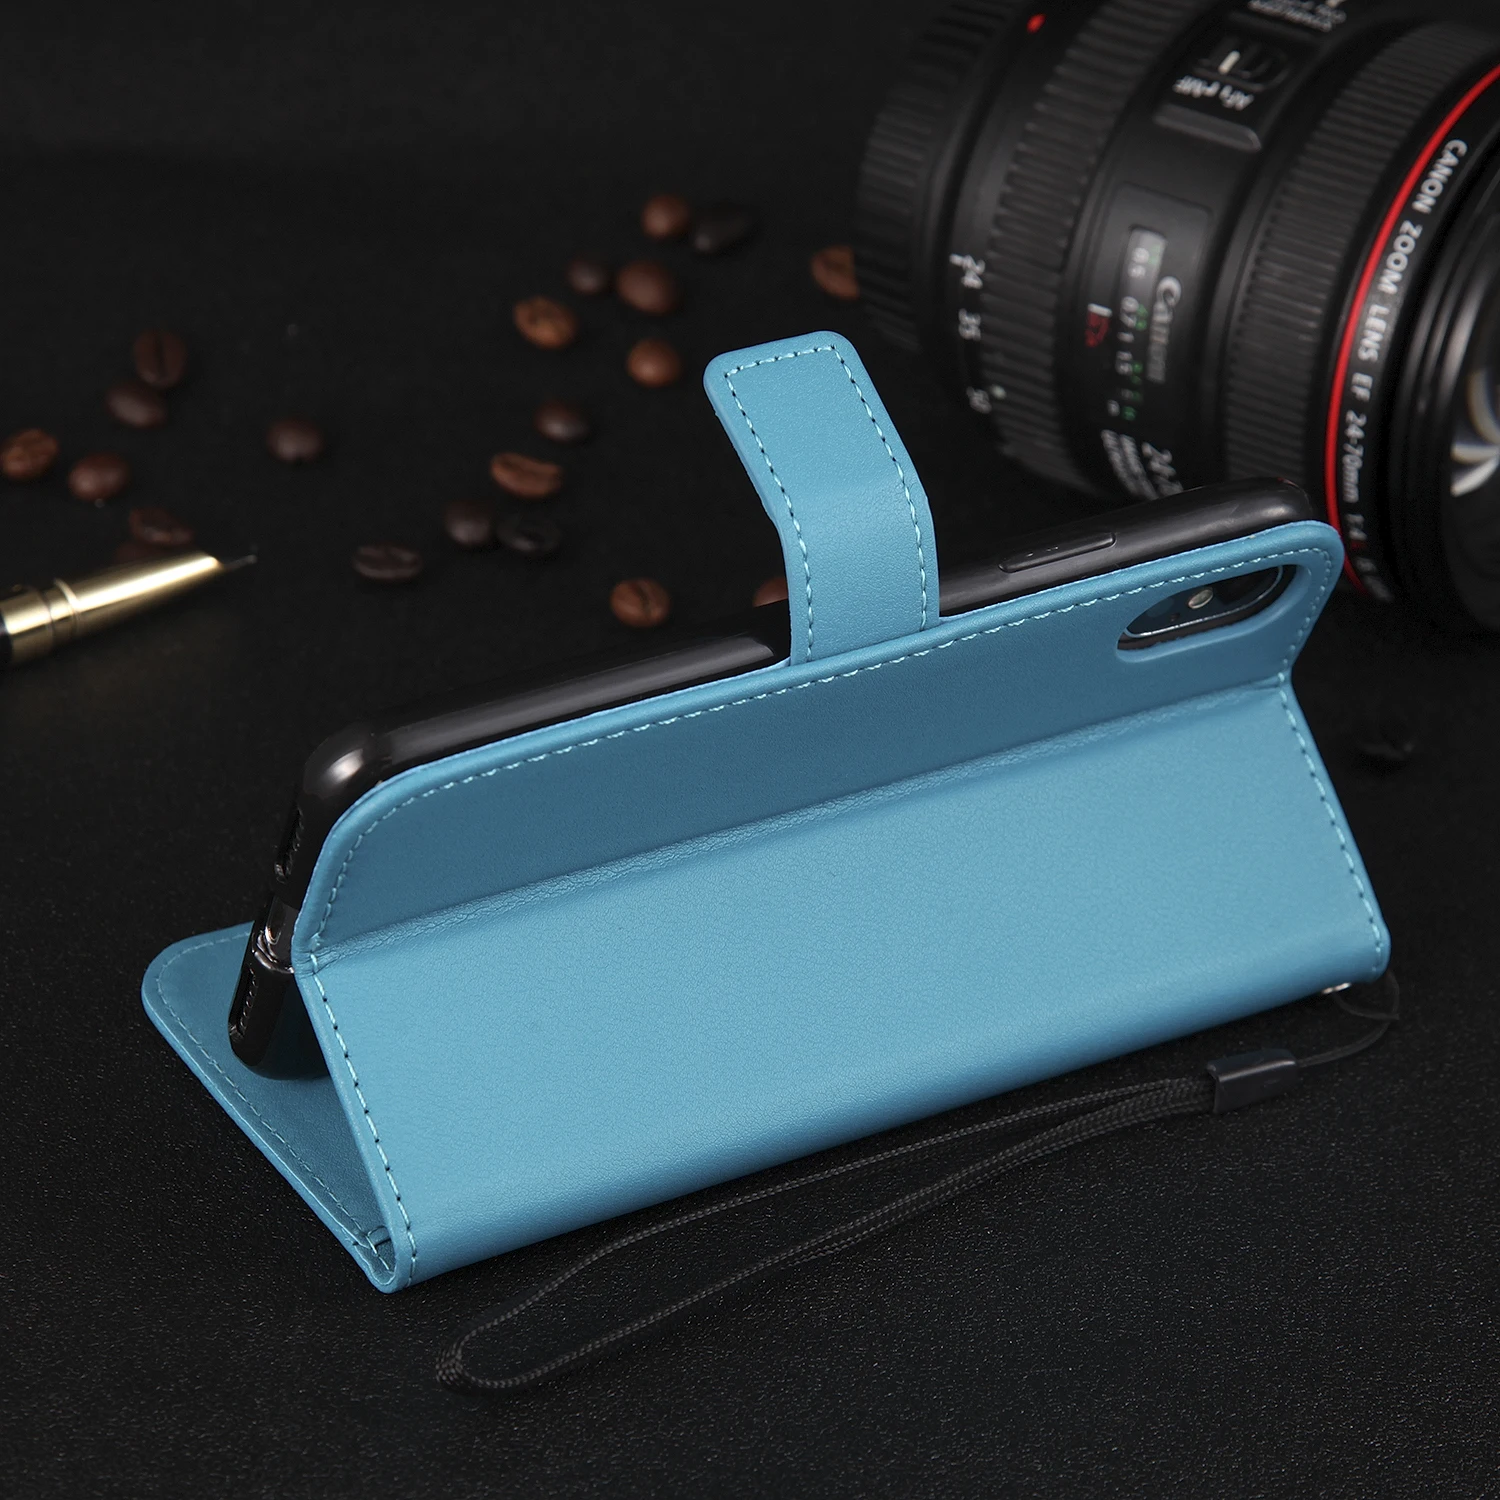 Leather Flip Wallet Case For Samsung Galaxy A3 A5 2016 2017 A6 A7 A8 A9 2018 A01 A02 J2 J3 J4 J5 J6 Plus J7 J8 Protect Cover 4